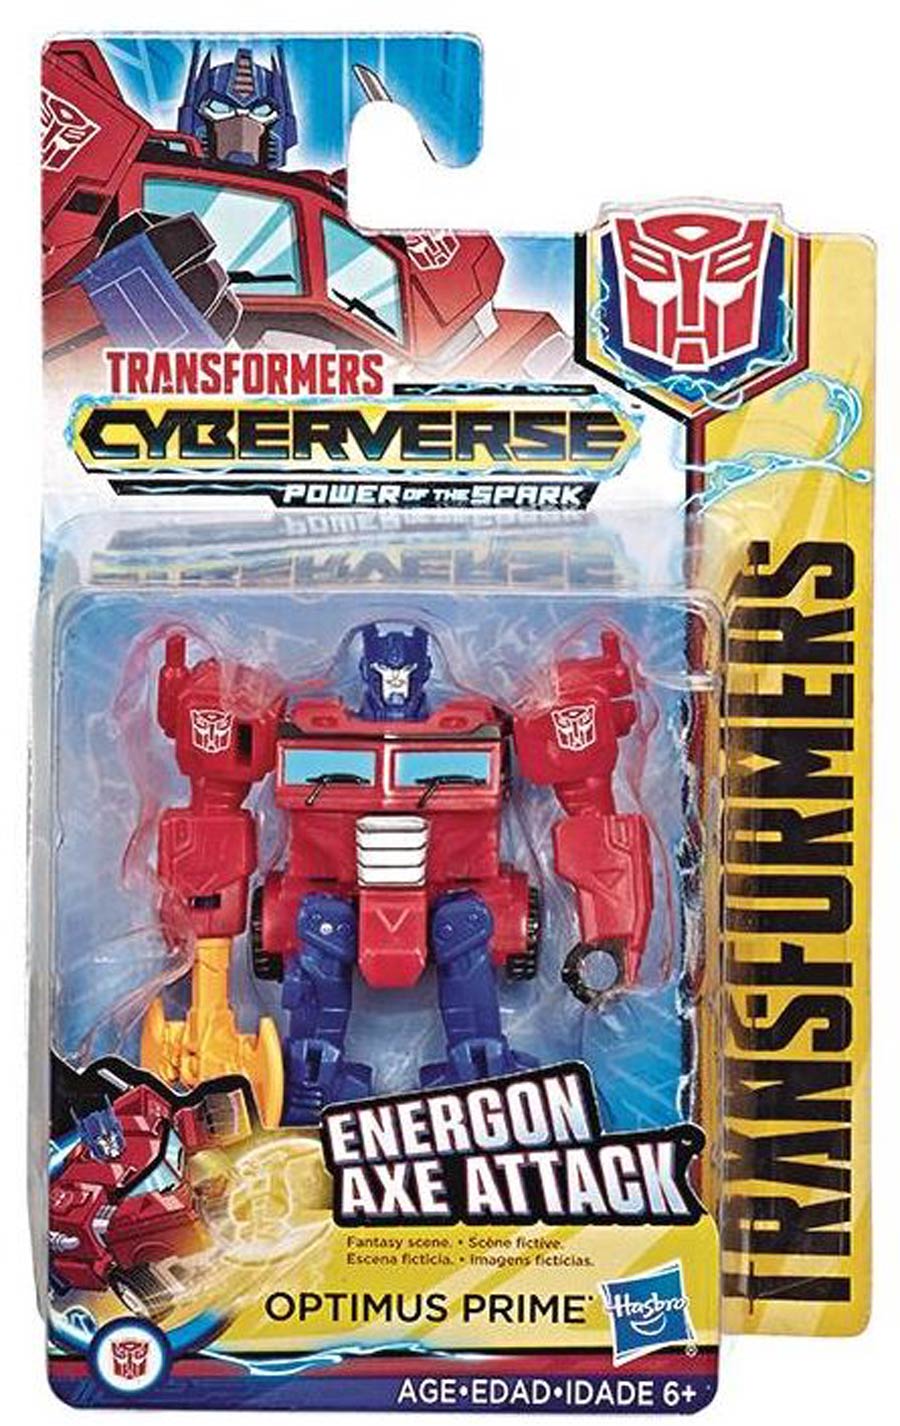 Transformers Cyberverse Scout Action Figure Assortment 201903 - Optimus Prime (Energon Axe Attack)